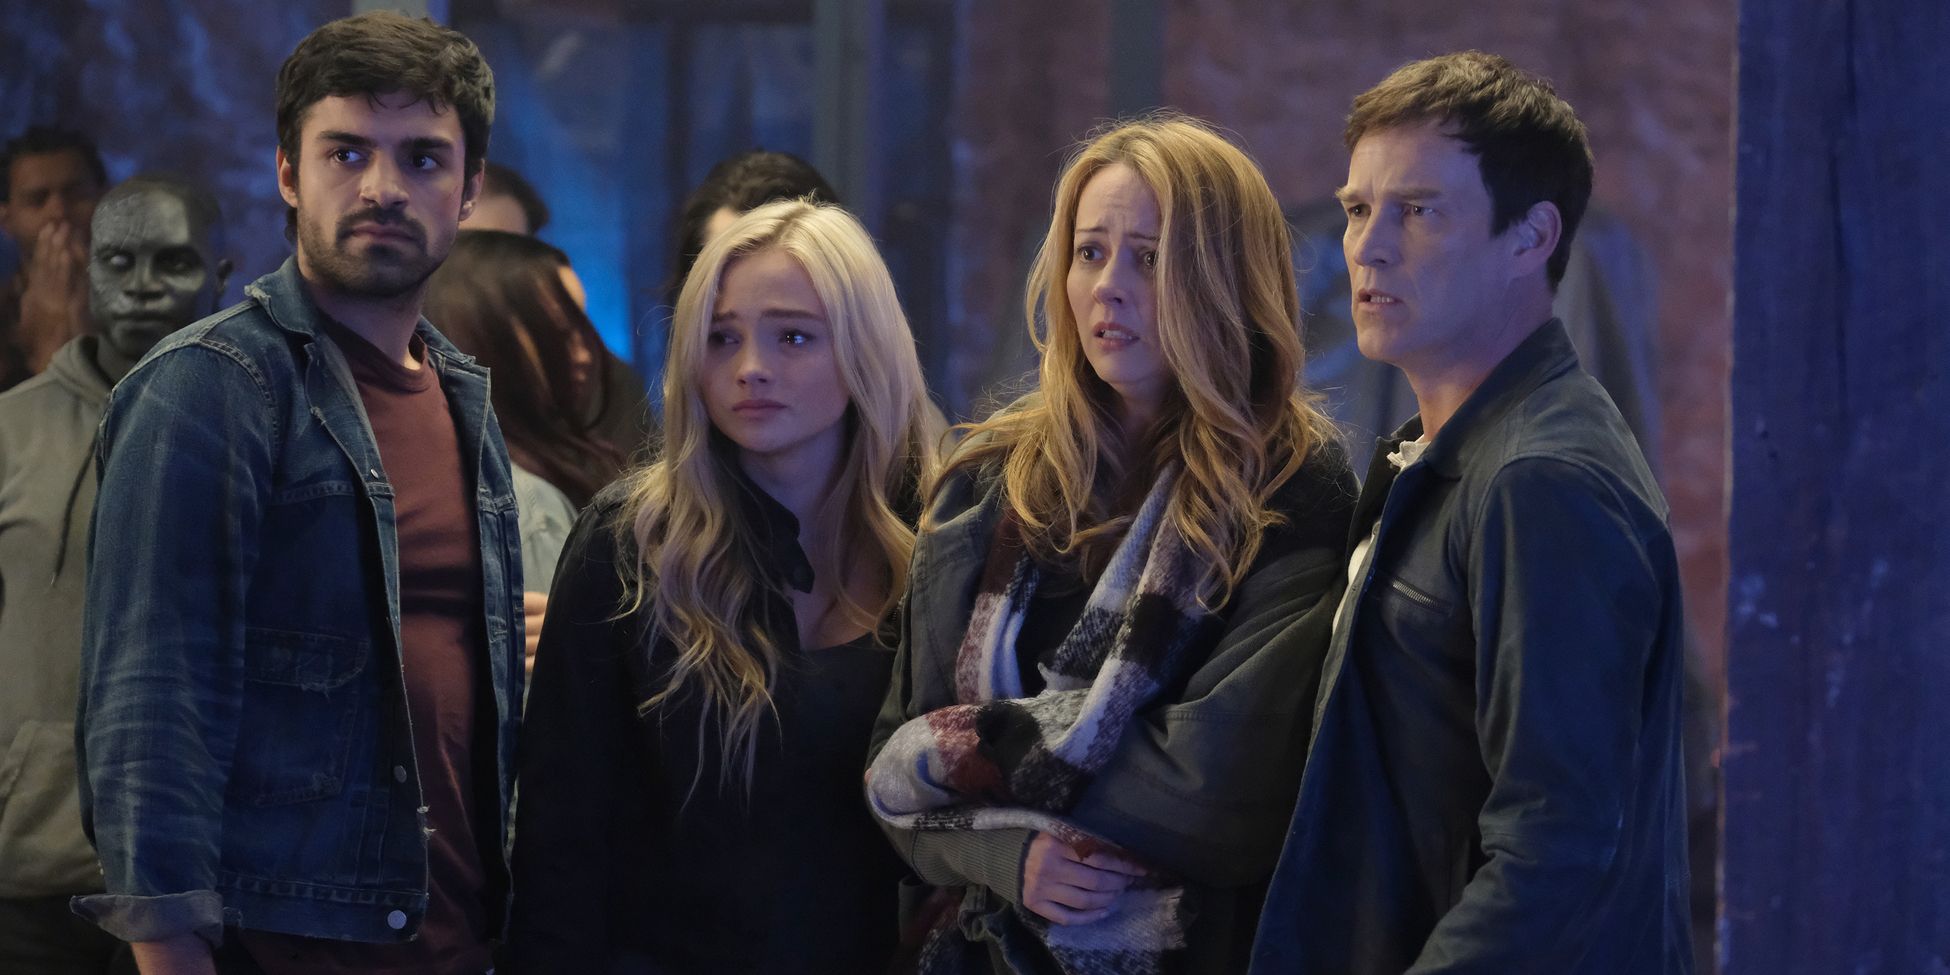 The Gifted Season Finale Boils Its Conflict Down to a Devastating Choice